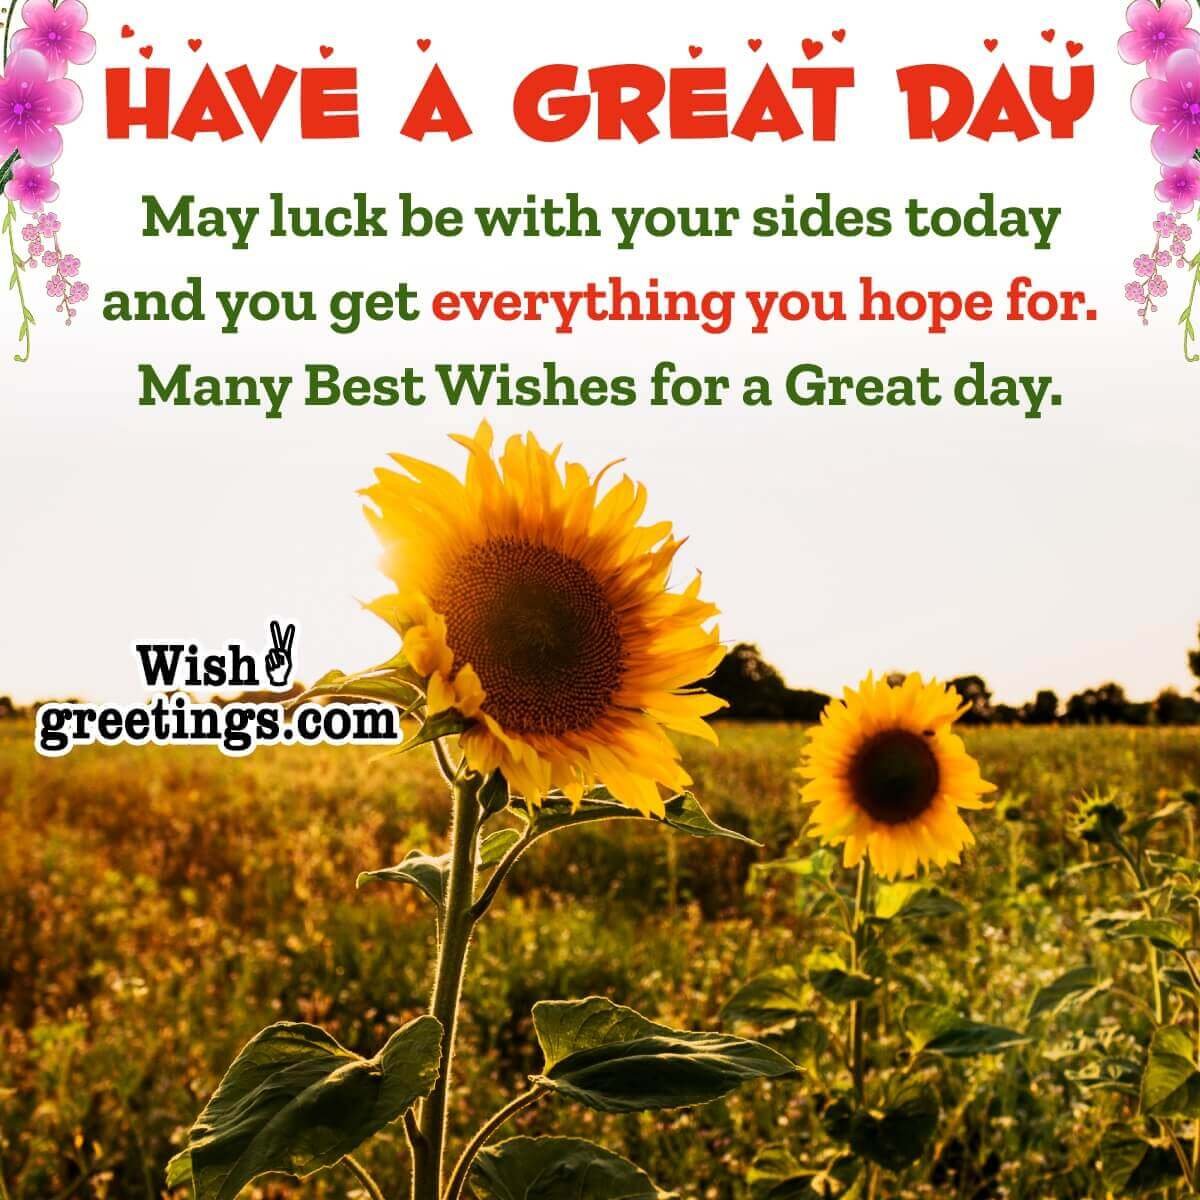 Have a Great Day Messages - Wish Greetings